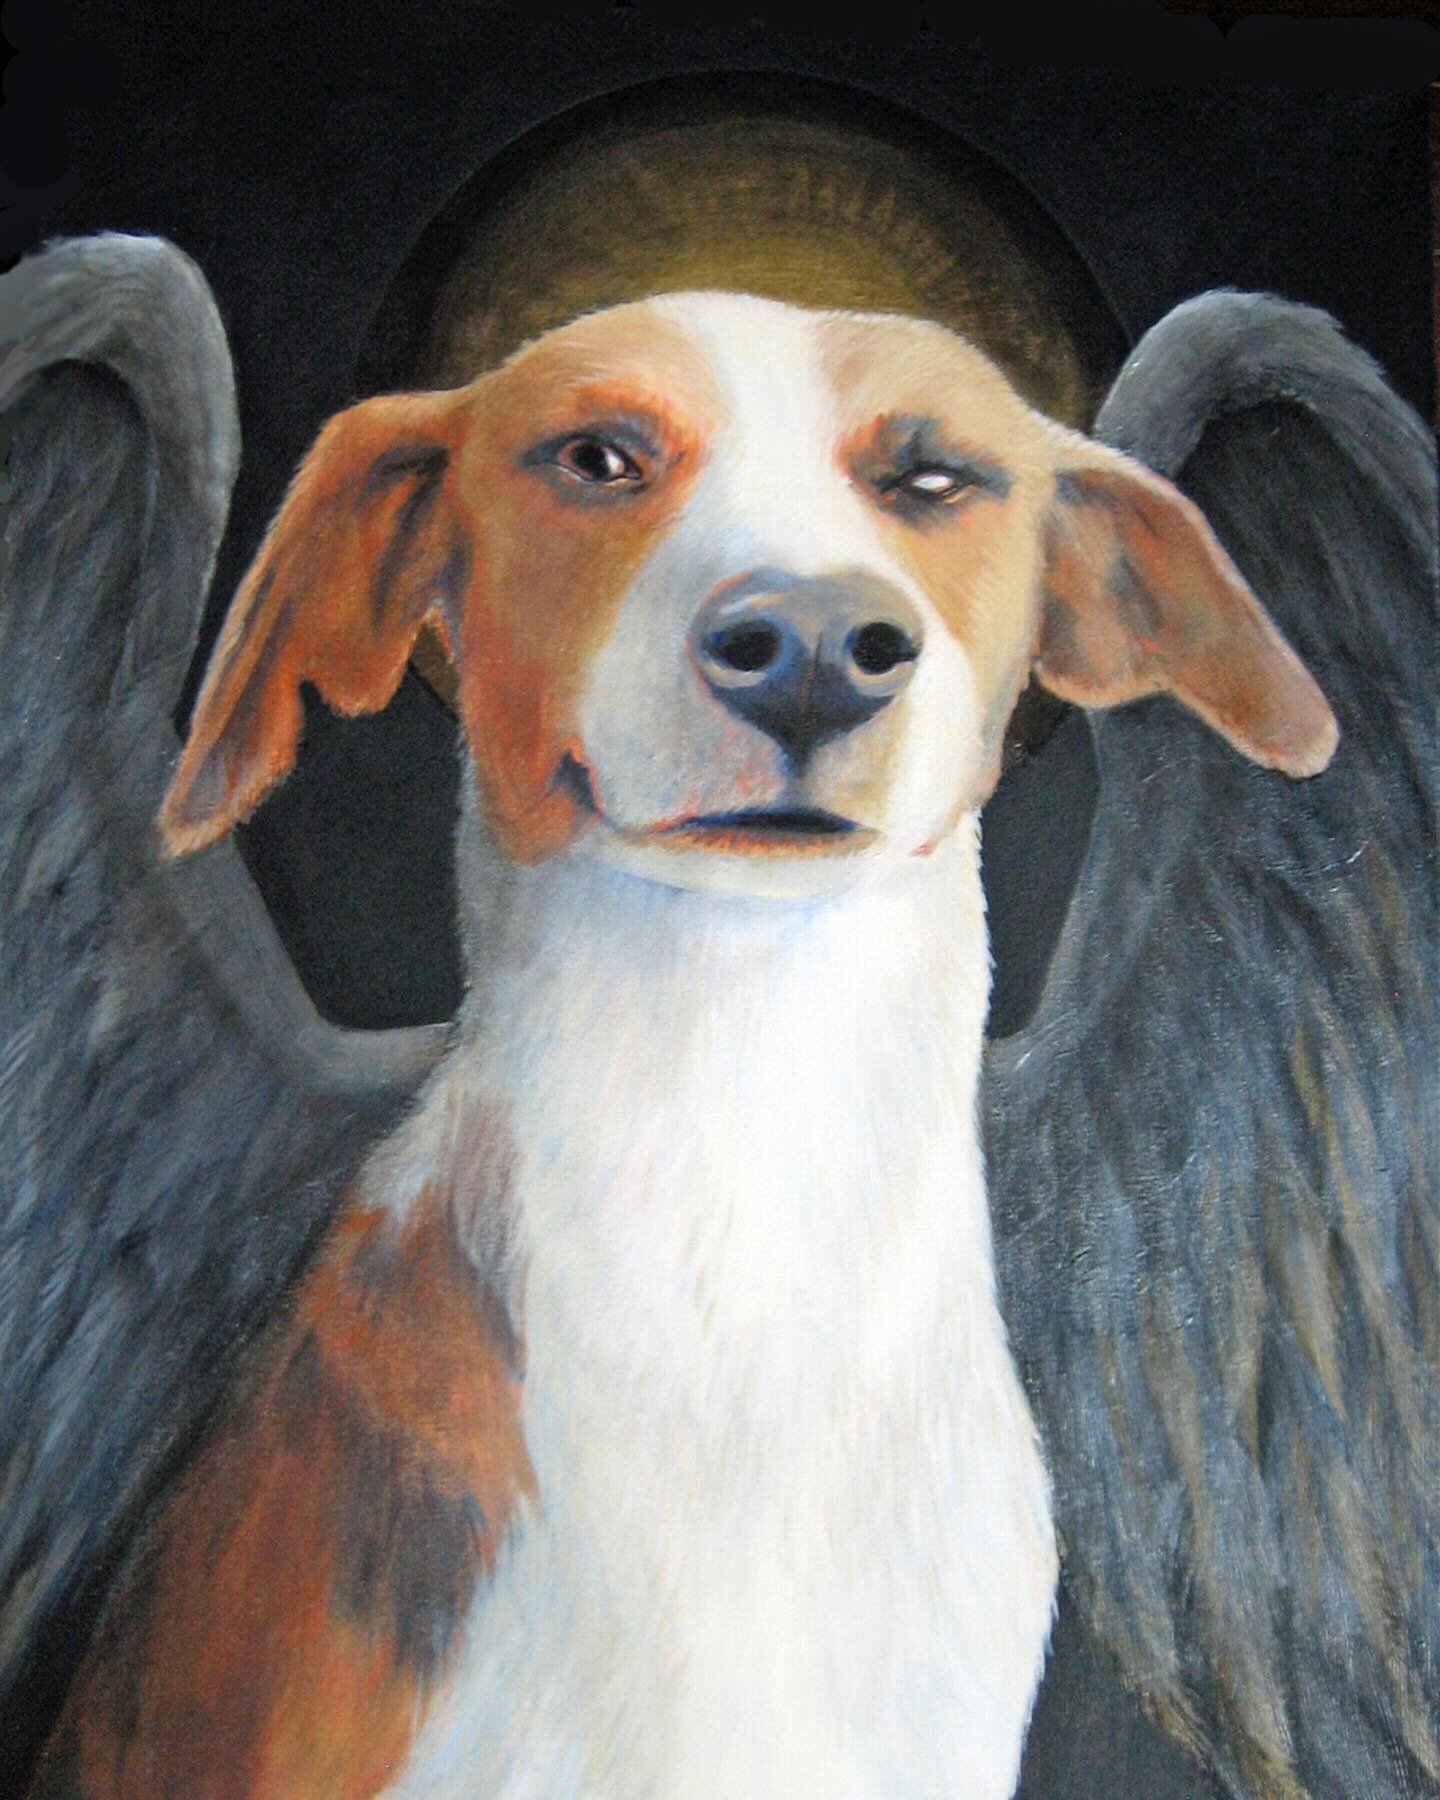 This is a painting I did years ago called The Messenger. If you do not follow @waynehhsiung Wayne + his Blog Simple Heart  simpleheart.org https://blog.simpleheart.org, you should! he and his great team are doing so much for animals. tomorrow March 1